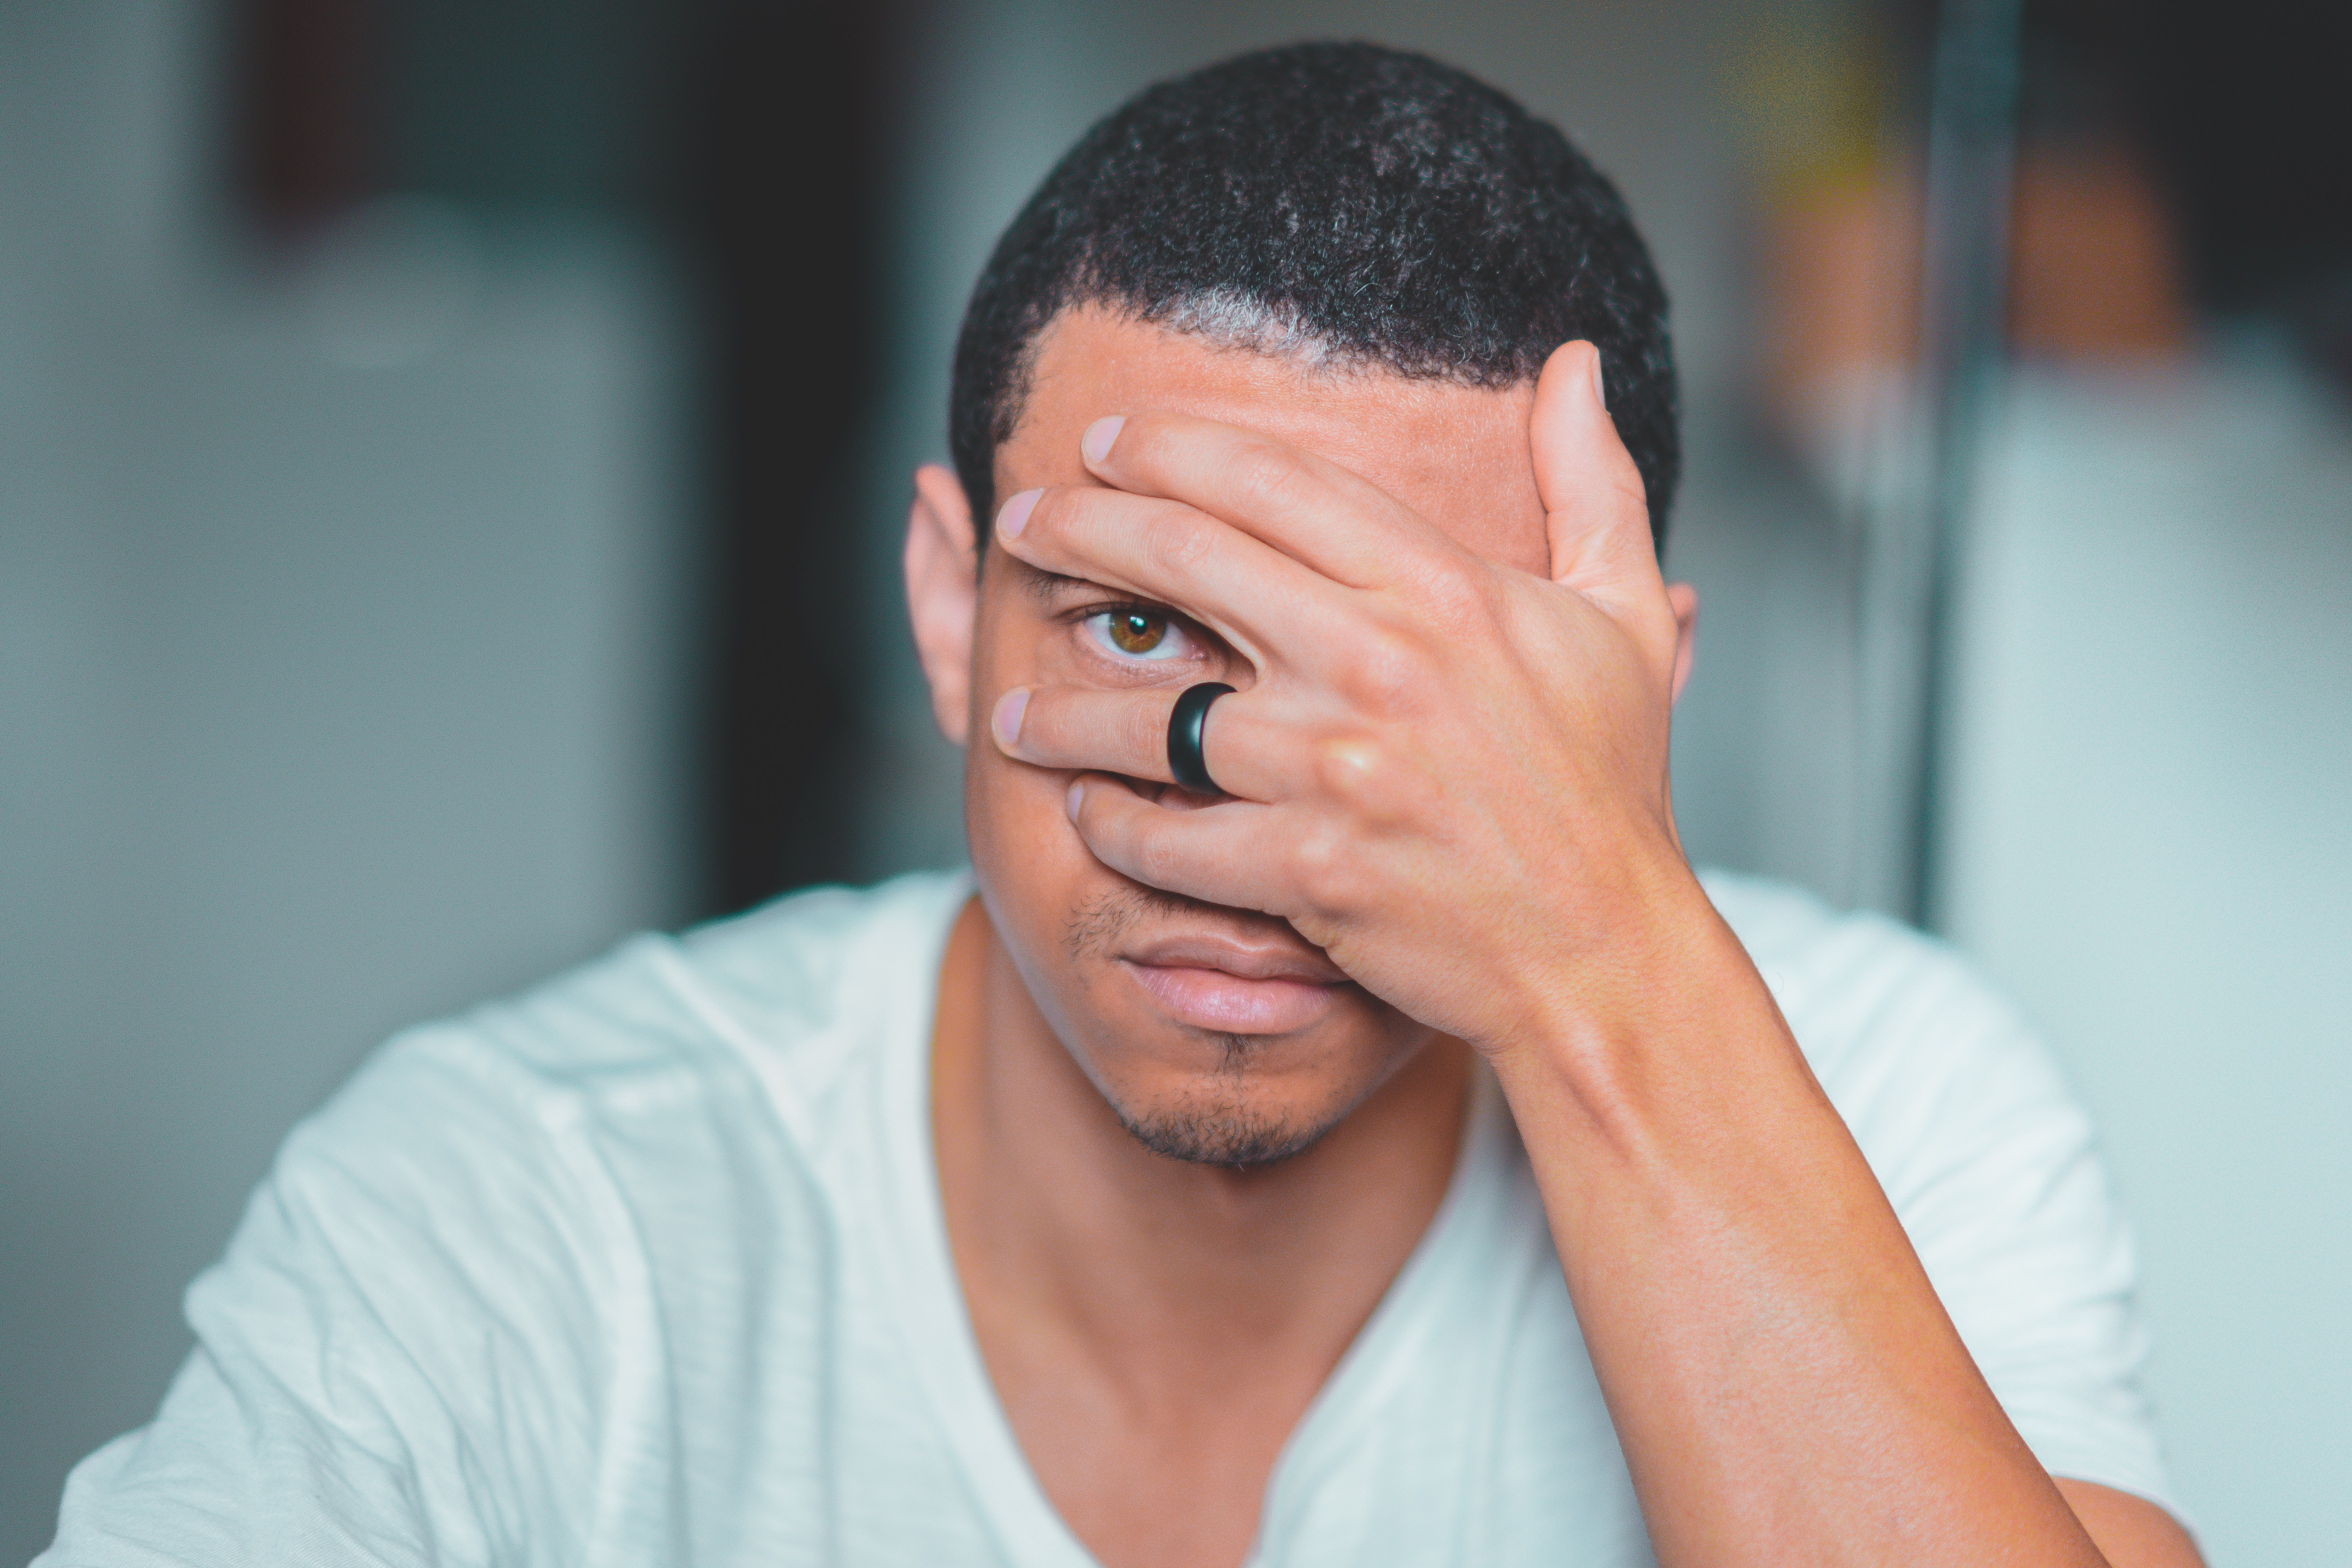 A multiracial man with short hair, covering his face except for one eye that he looks through.